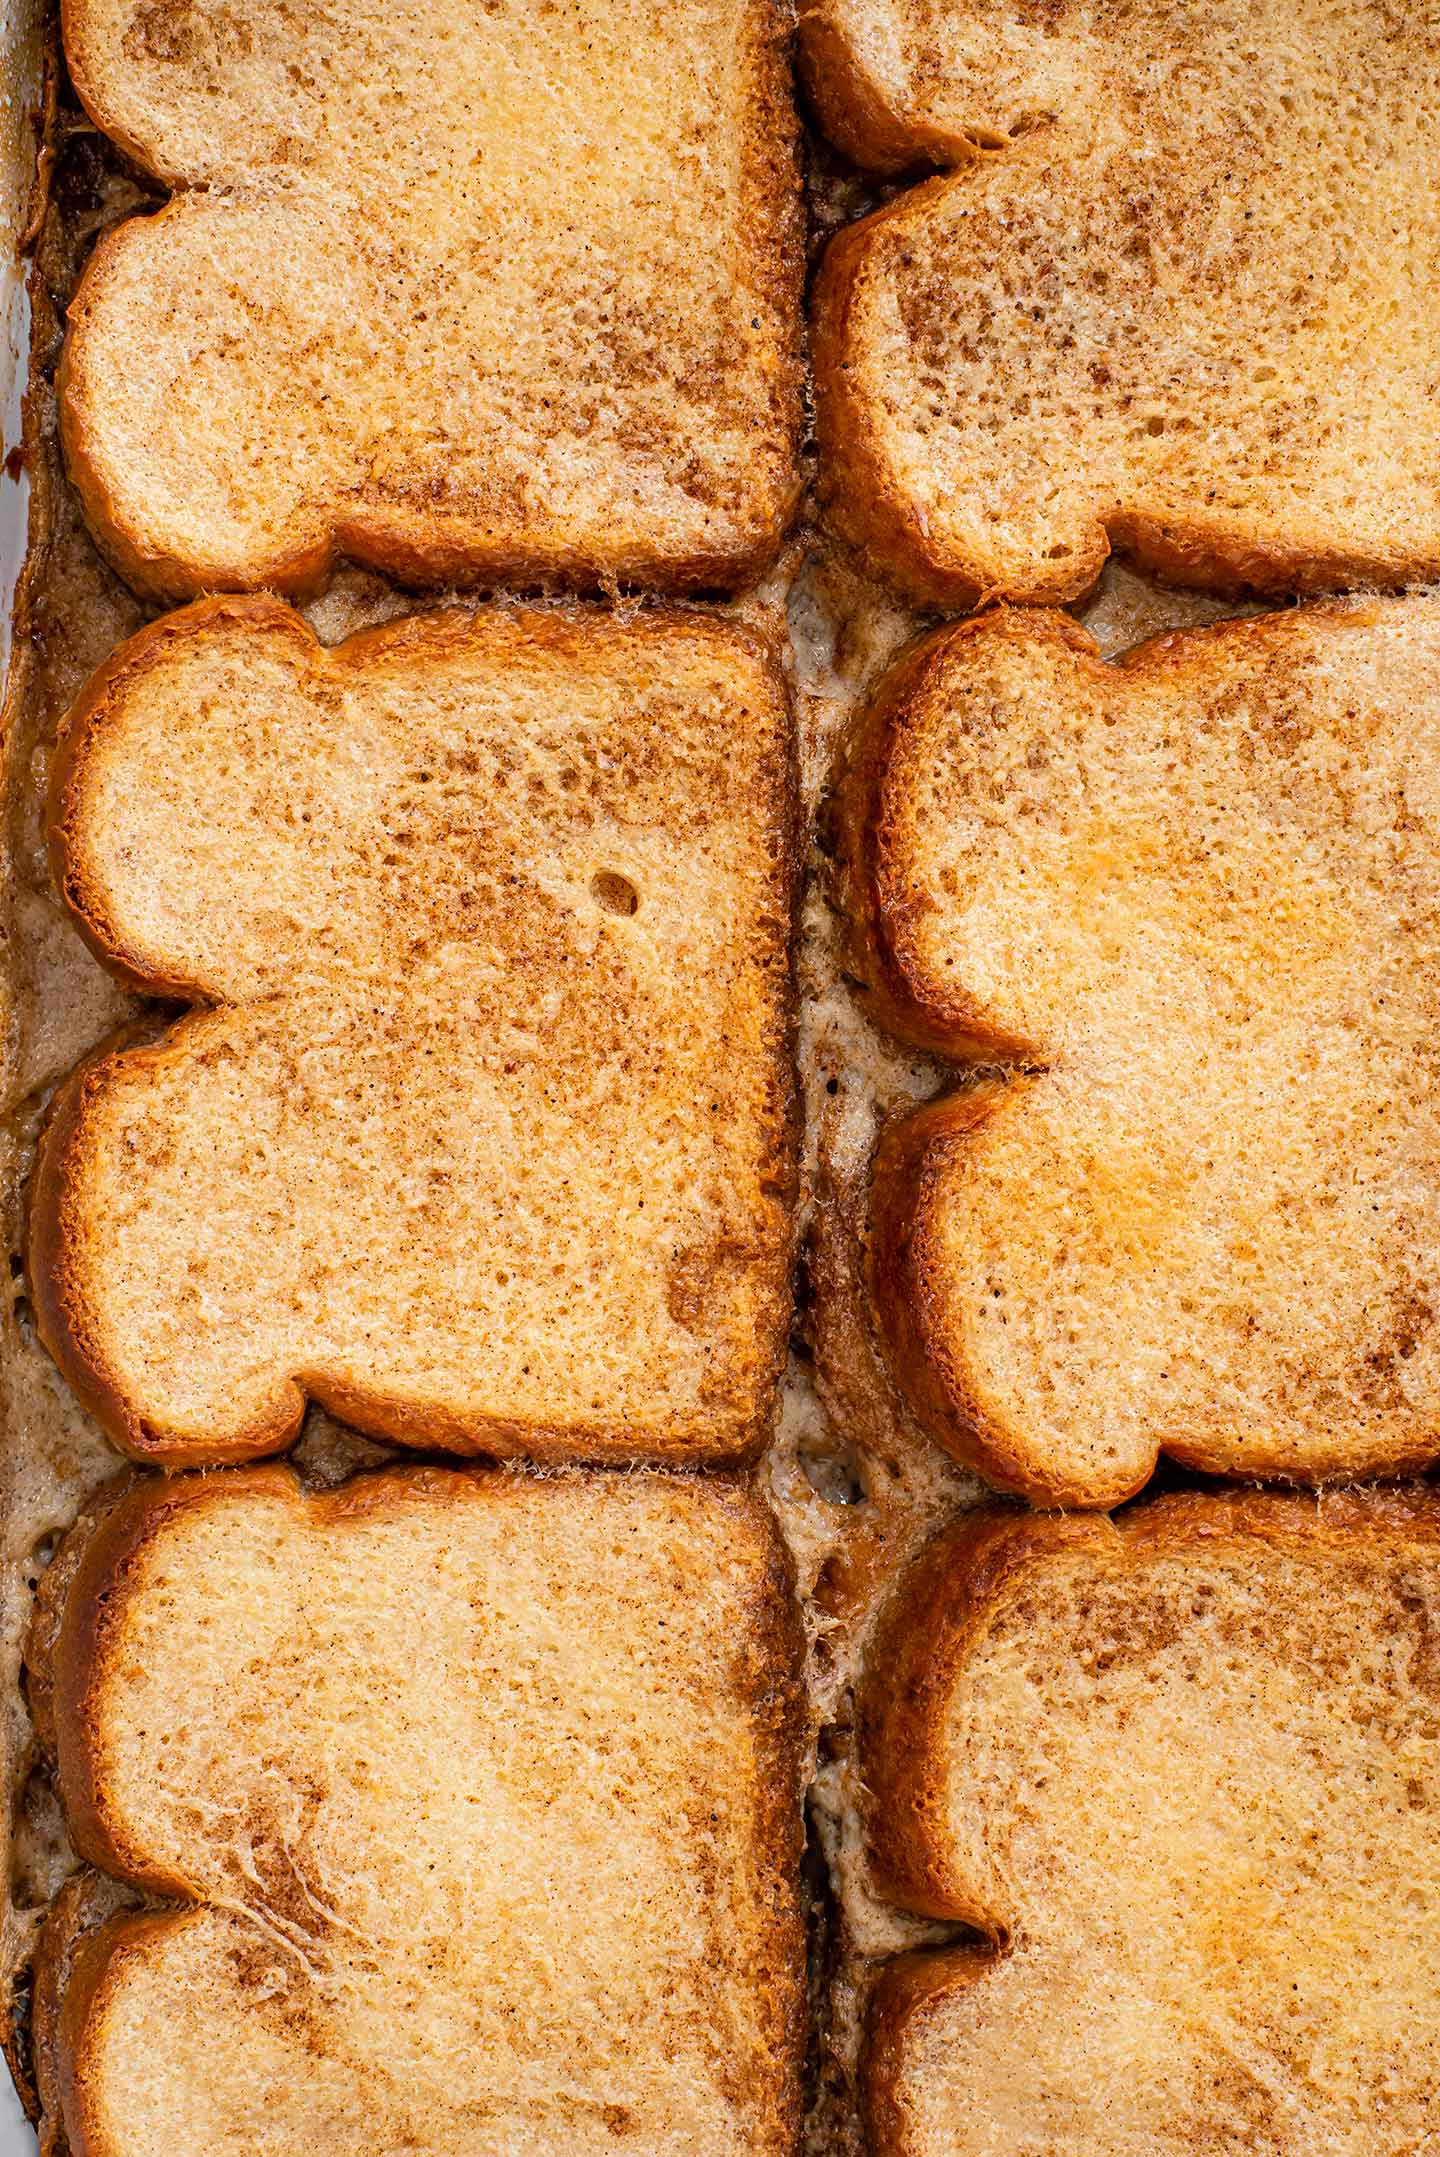 Top down view of a casserole dish full of golden slices of baked french toast.